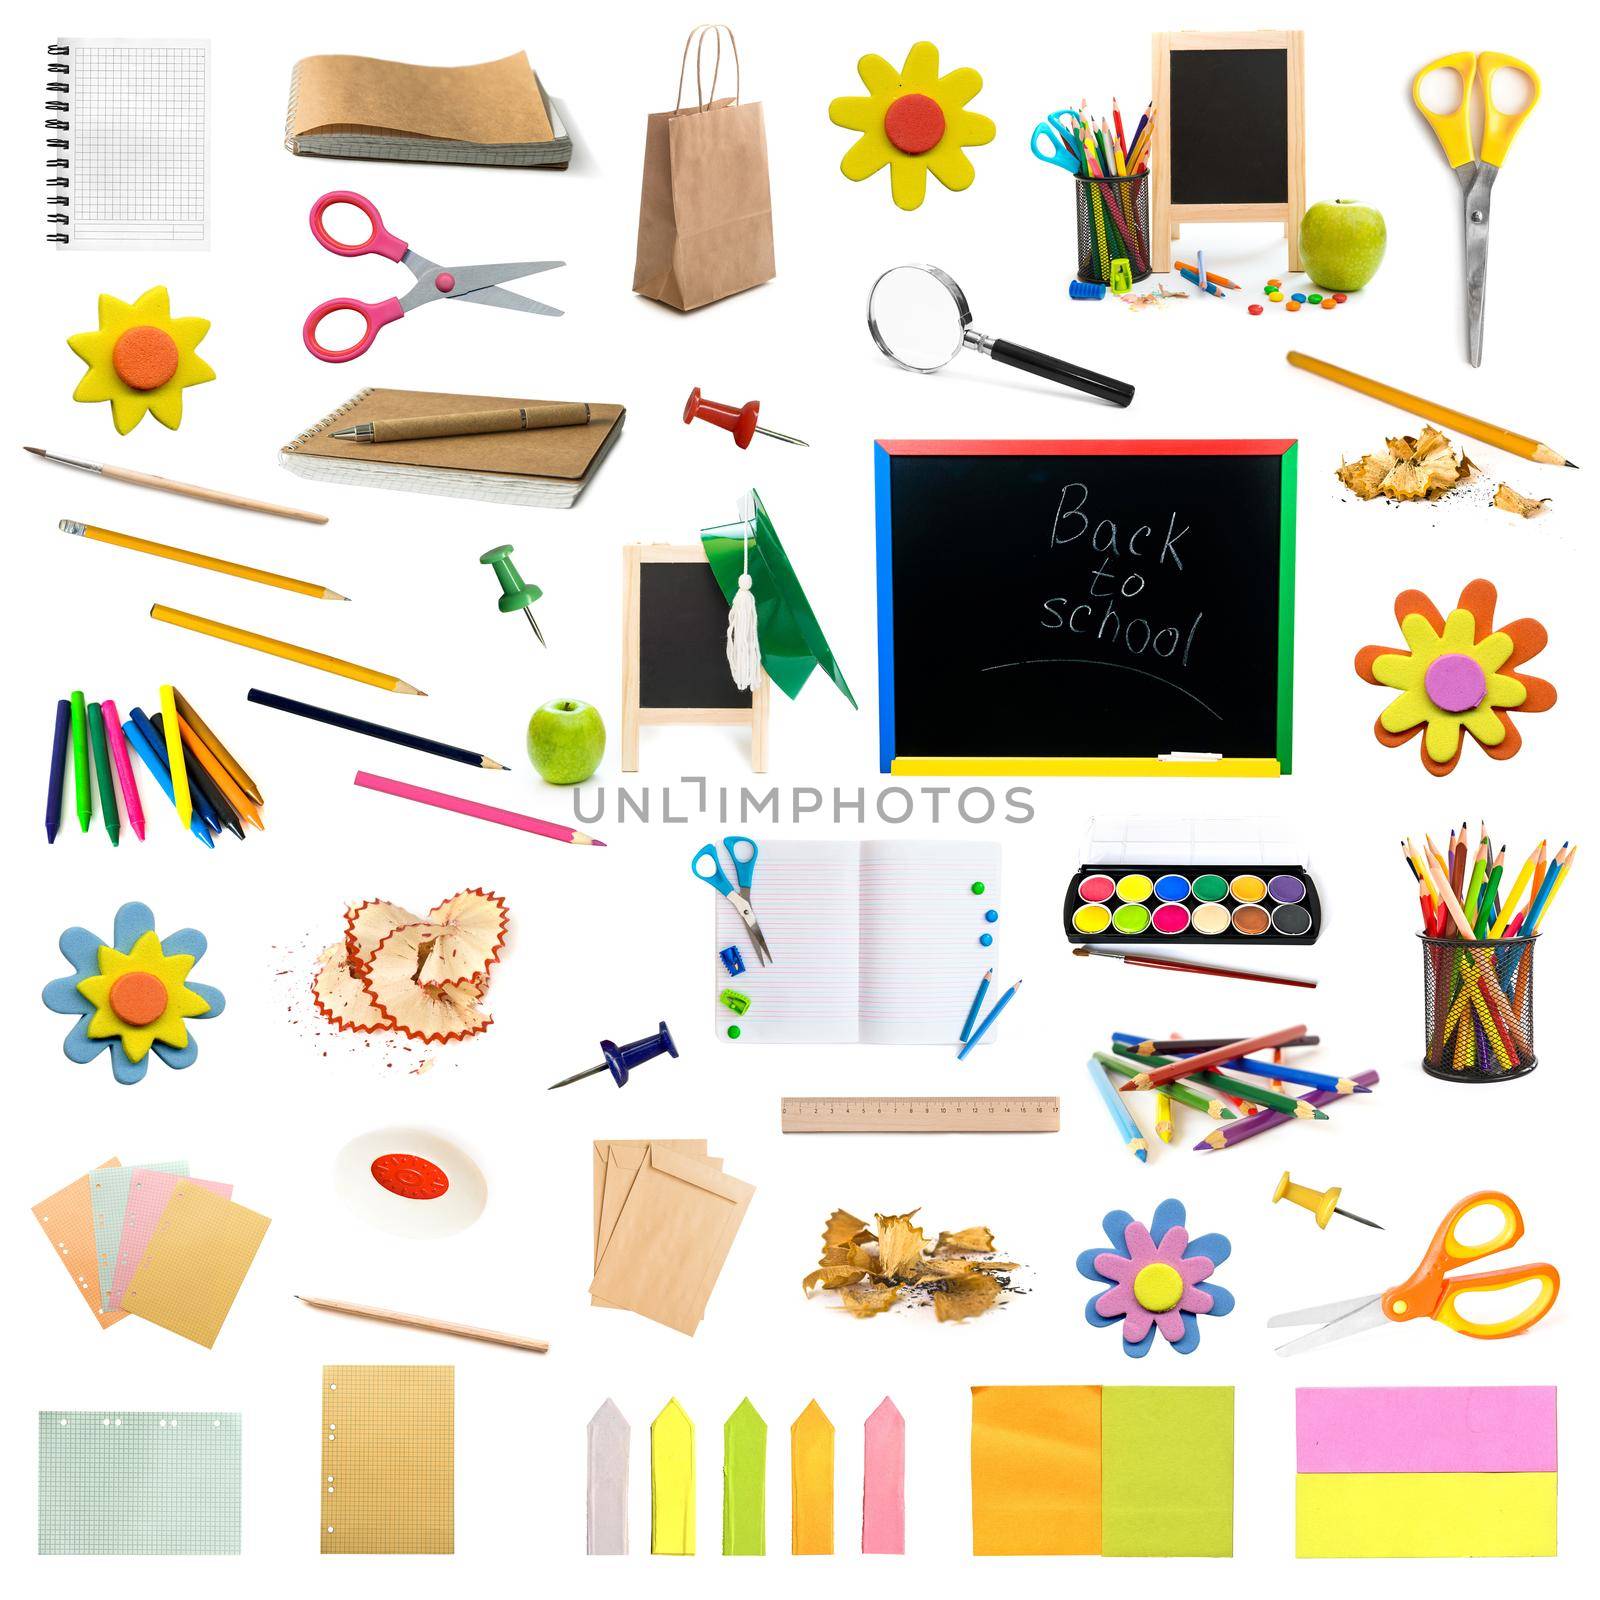 collage of childish stationery by tan4ikk1